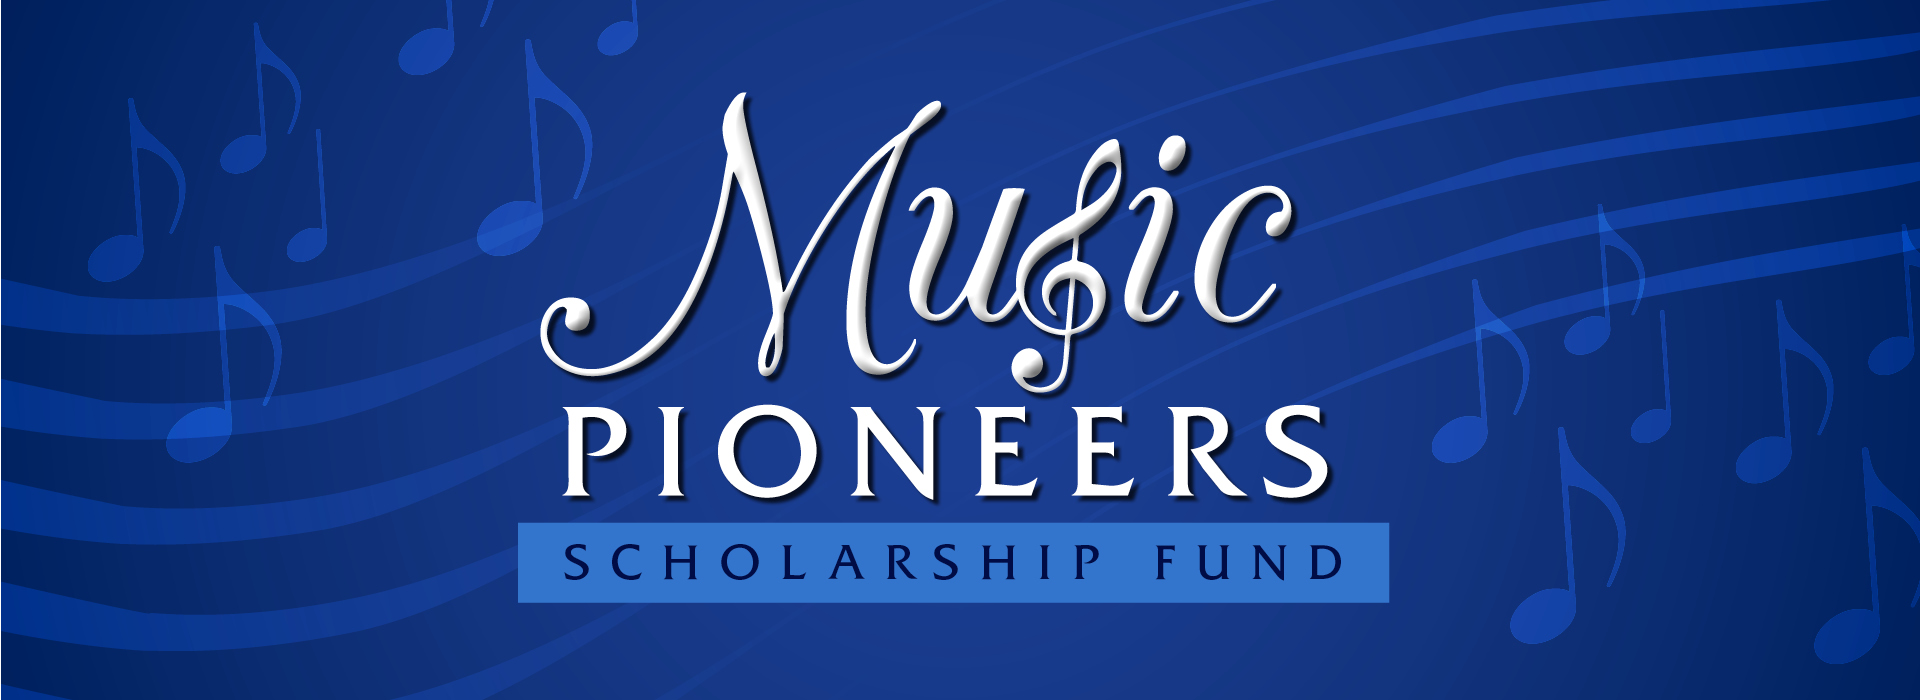 Music Pioneers Scholarship fund banner on blue